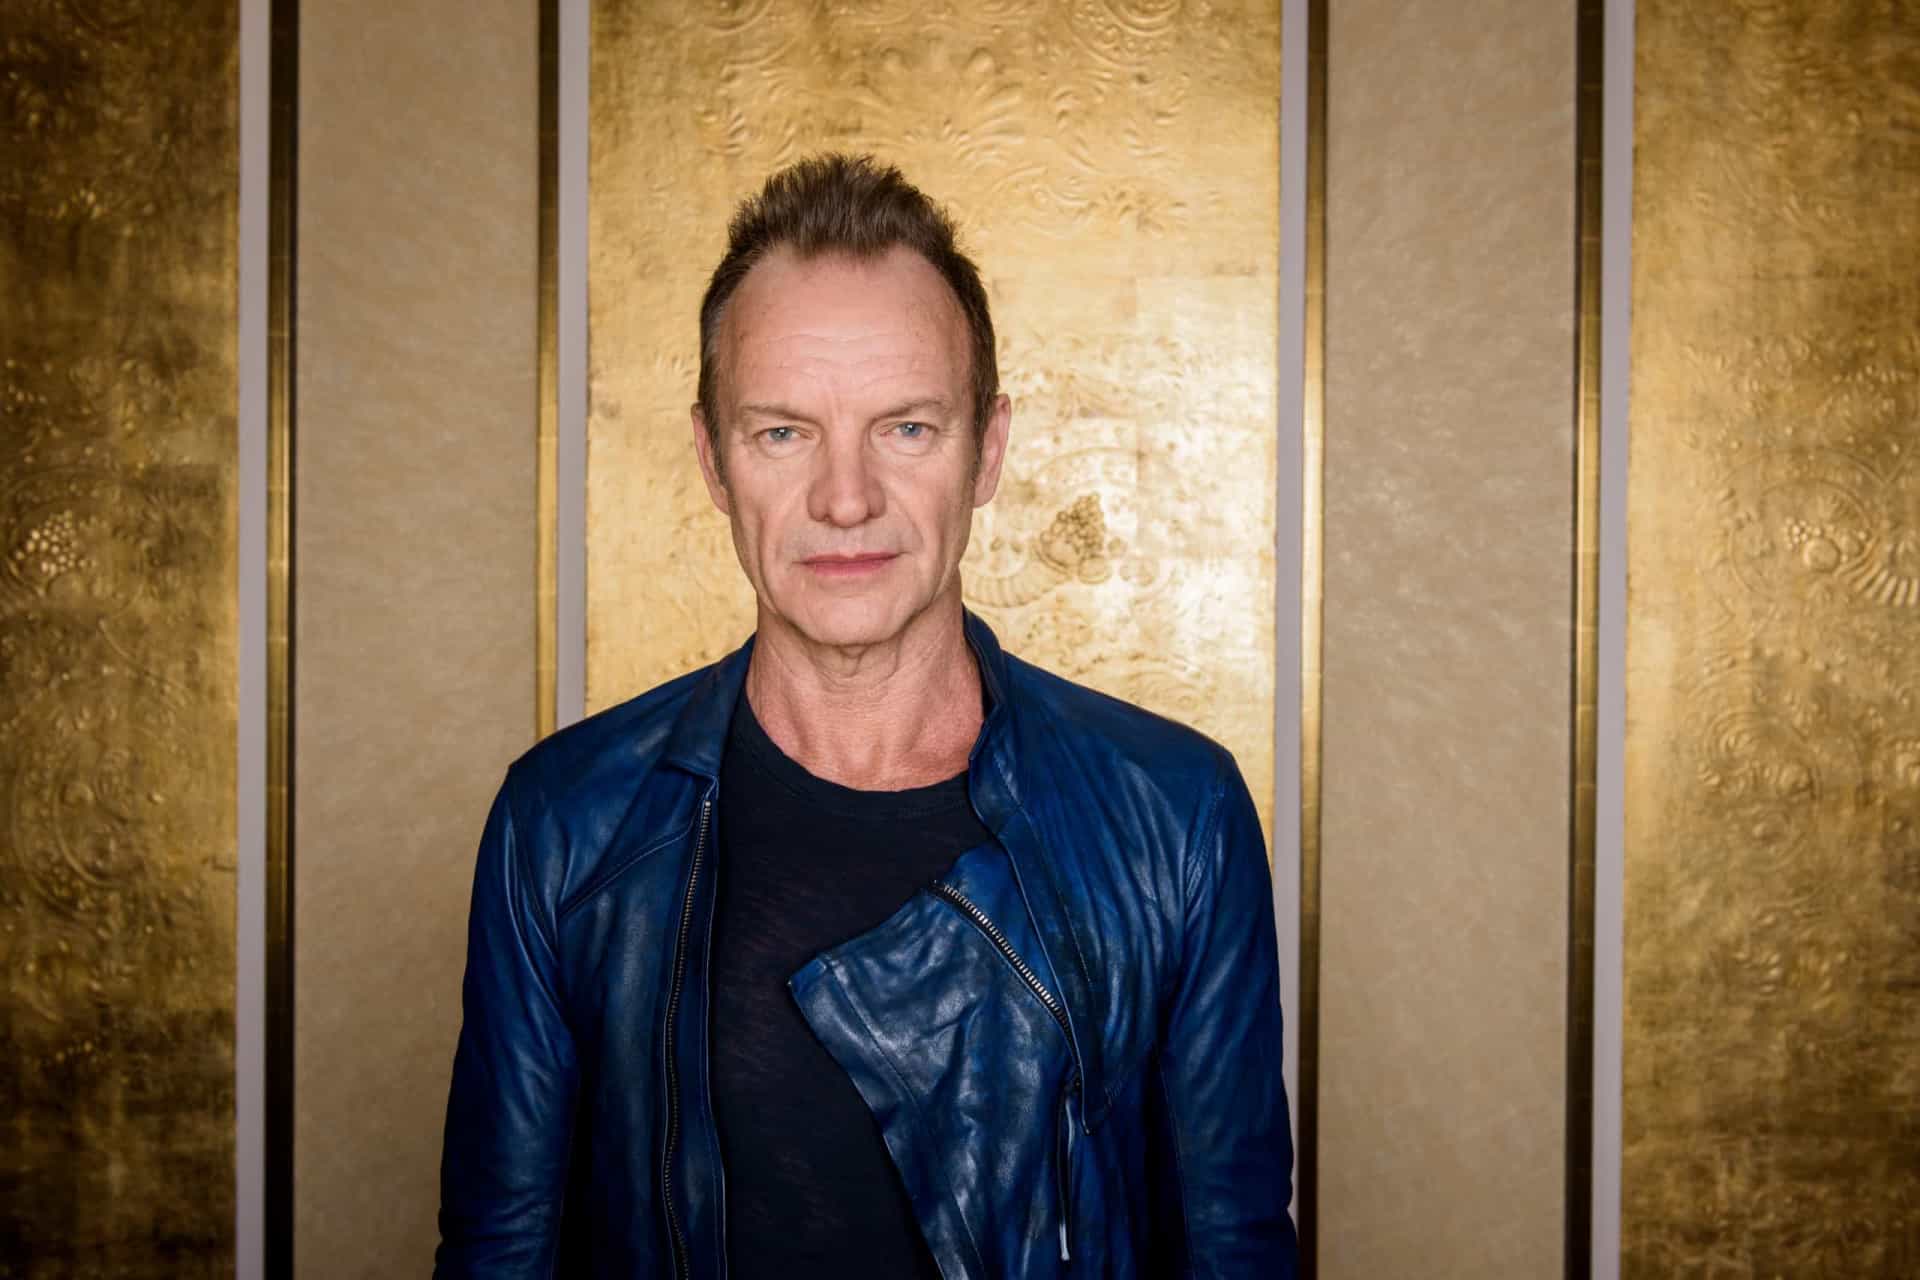 <p>Sting has sung on multiple albums, but less out of necessity and more from artistic experimentation. His voice appears on Phil Collins' album 'No Jacket Required' (1985) and on some Arcadia tracks.</p>